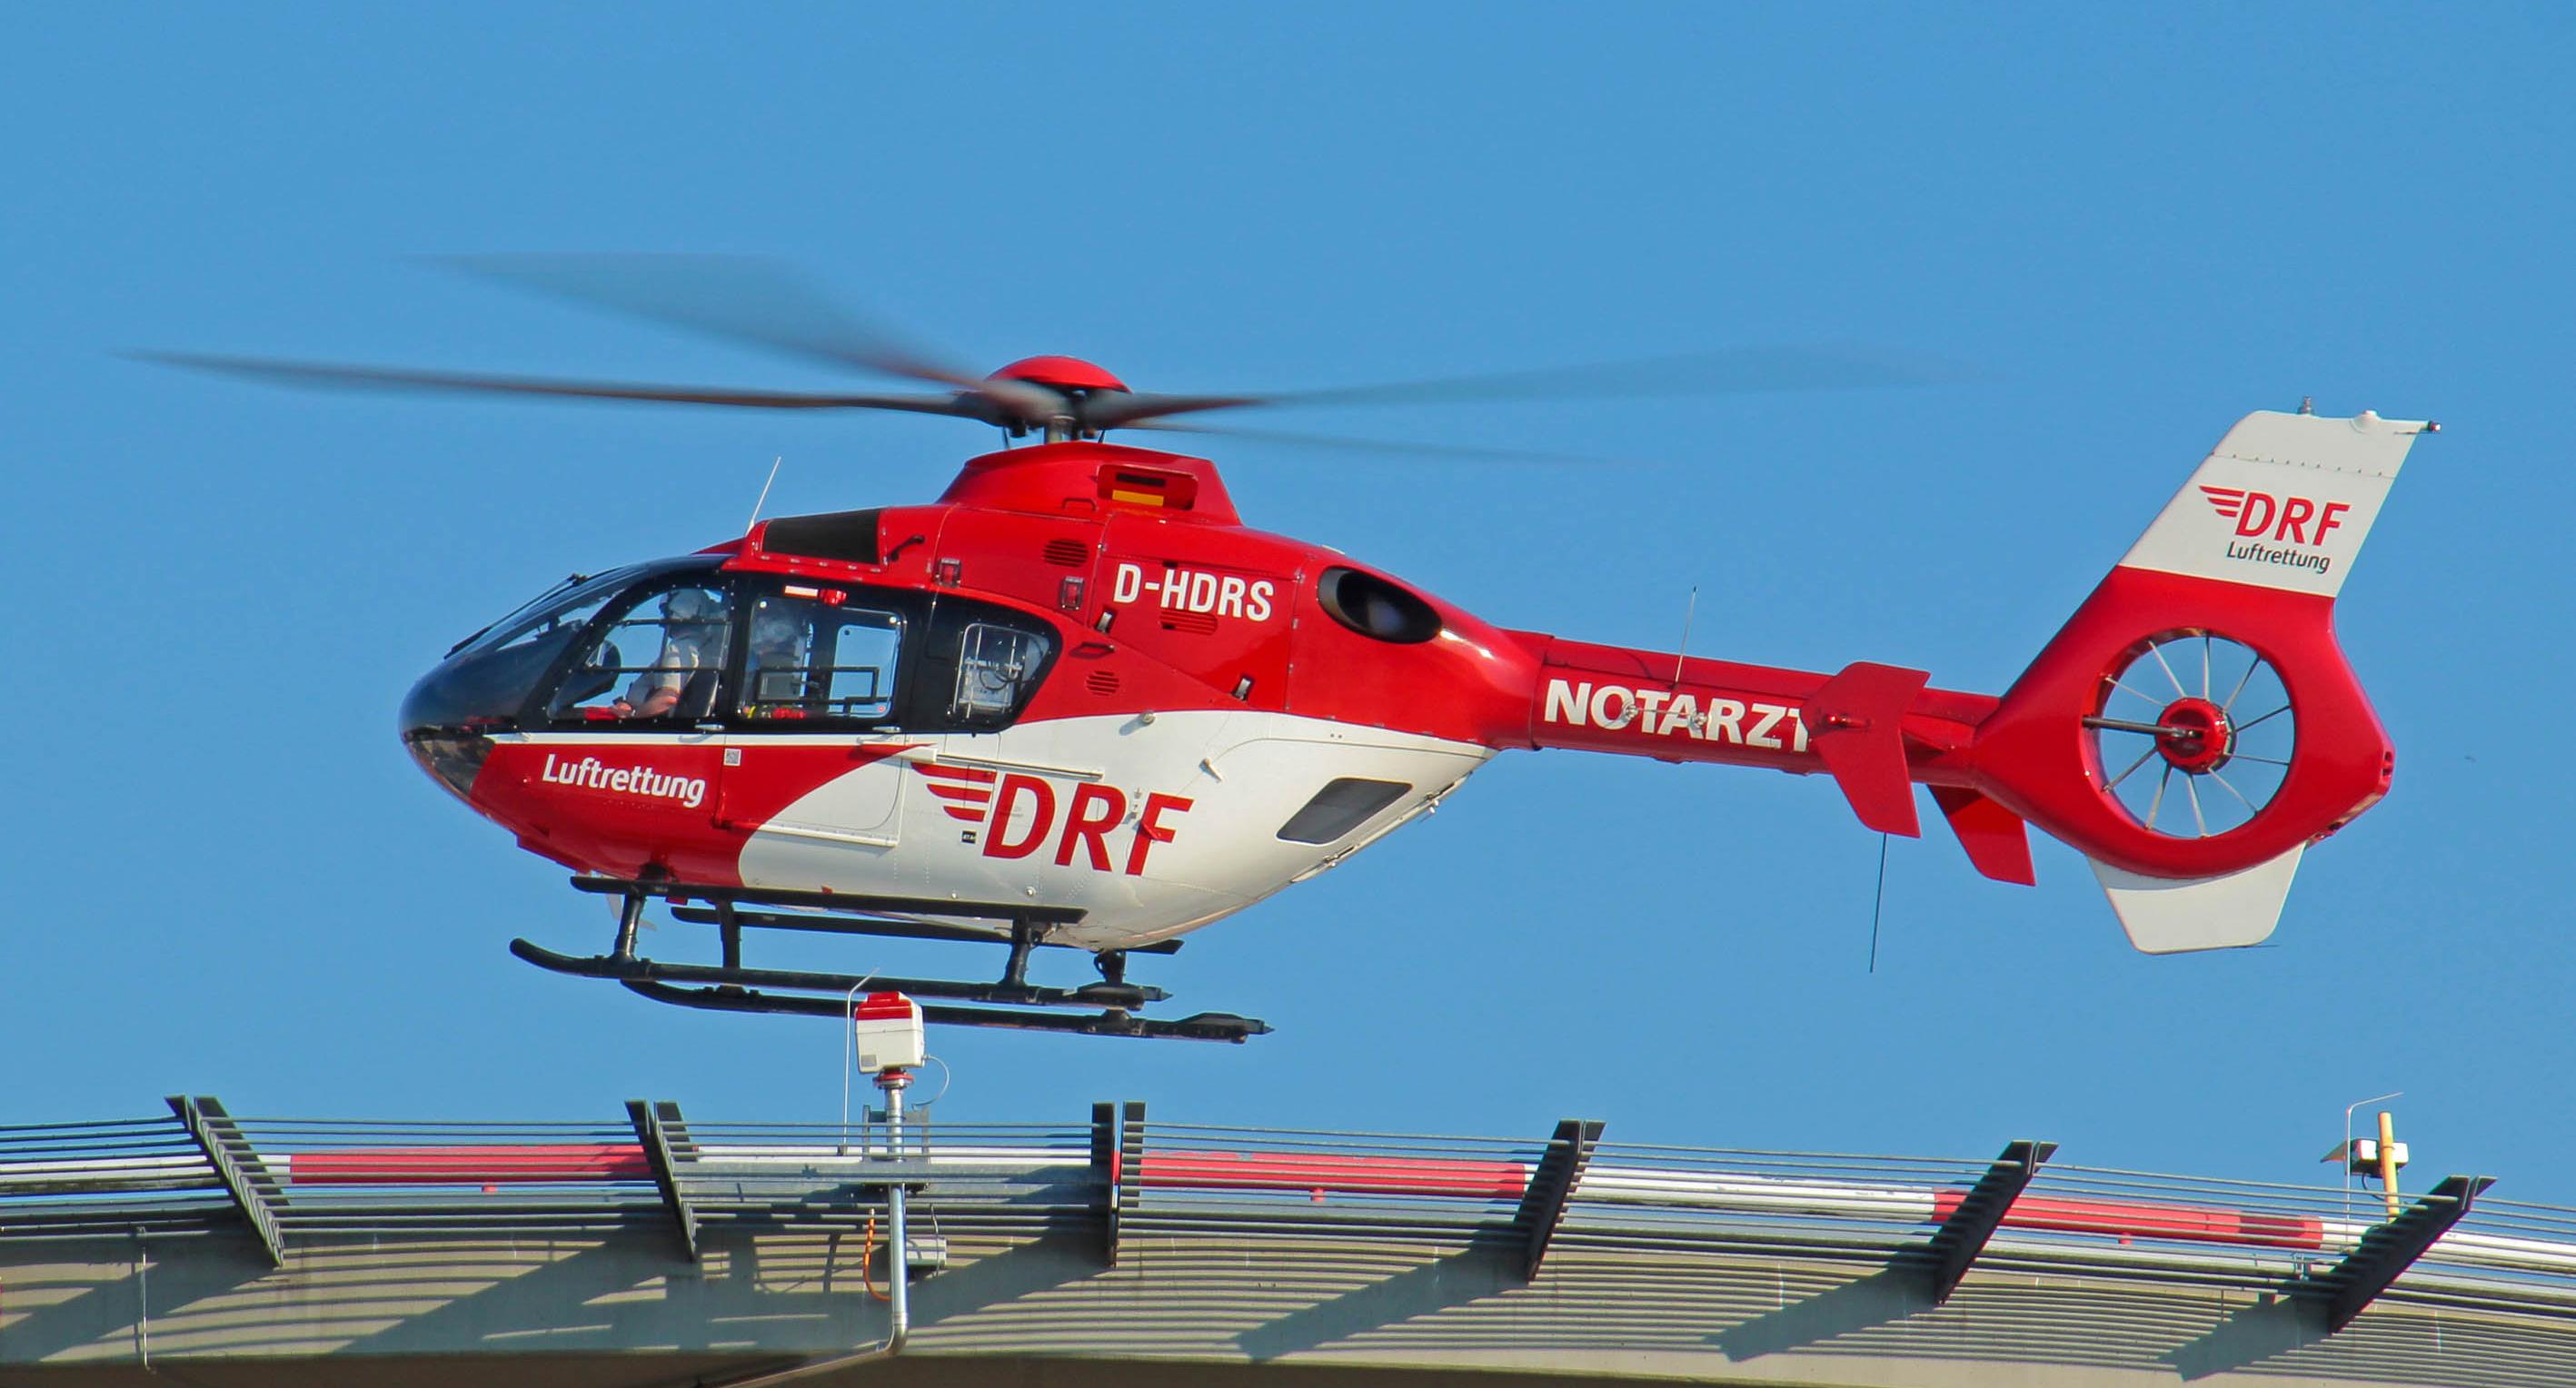 Ec 135 Drf: Technical Specifications of the EC 135 DRF